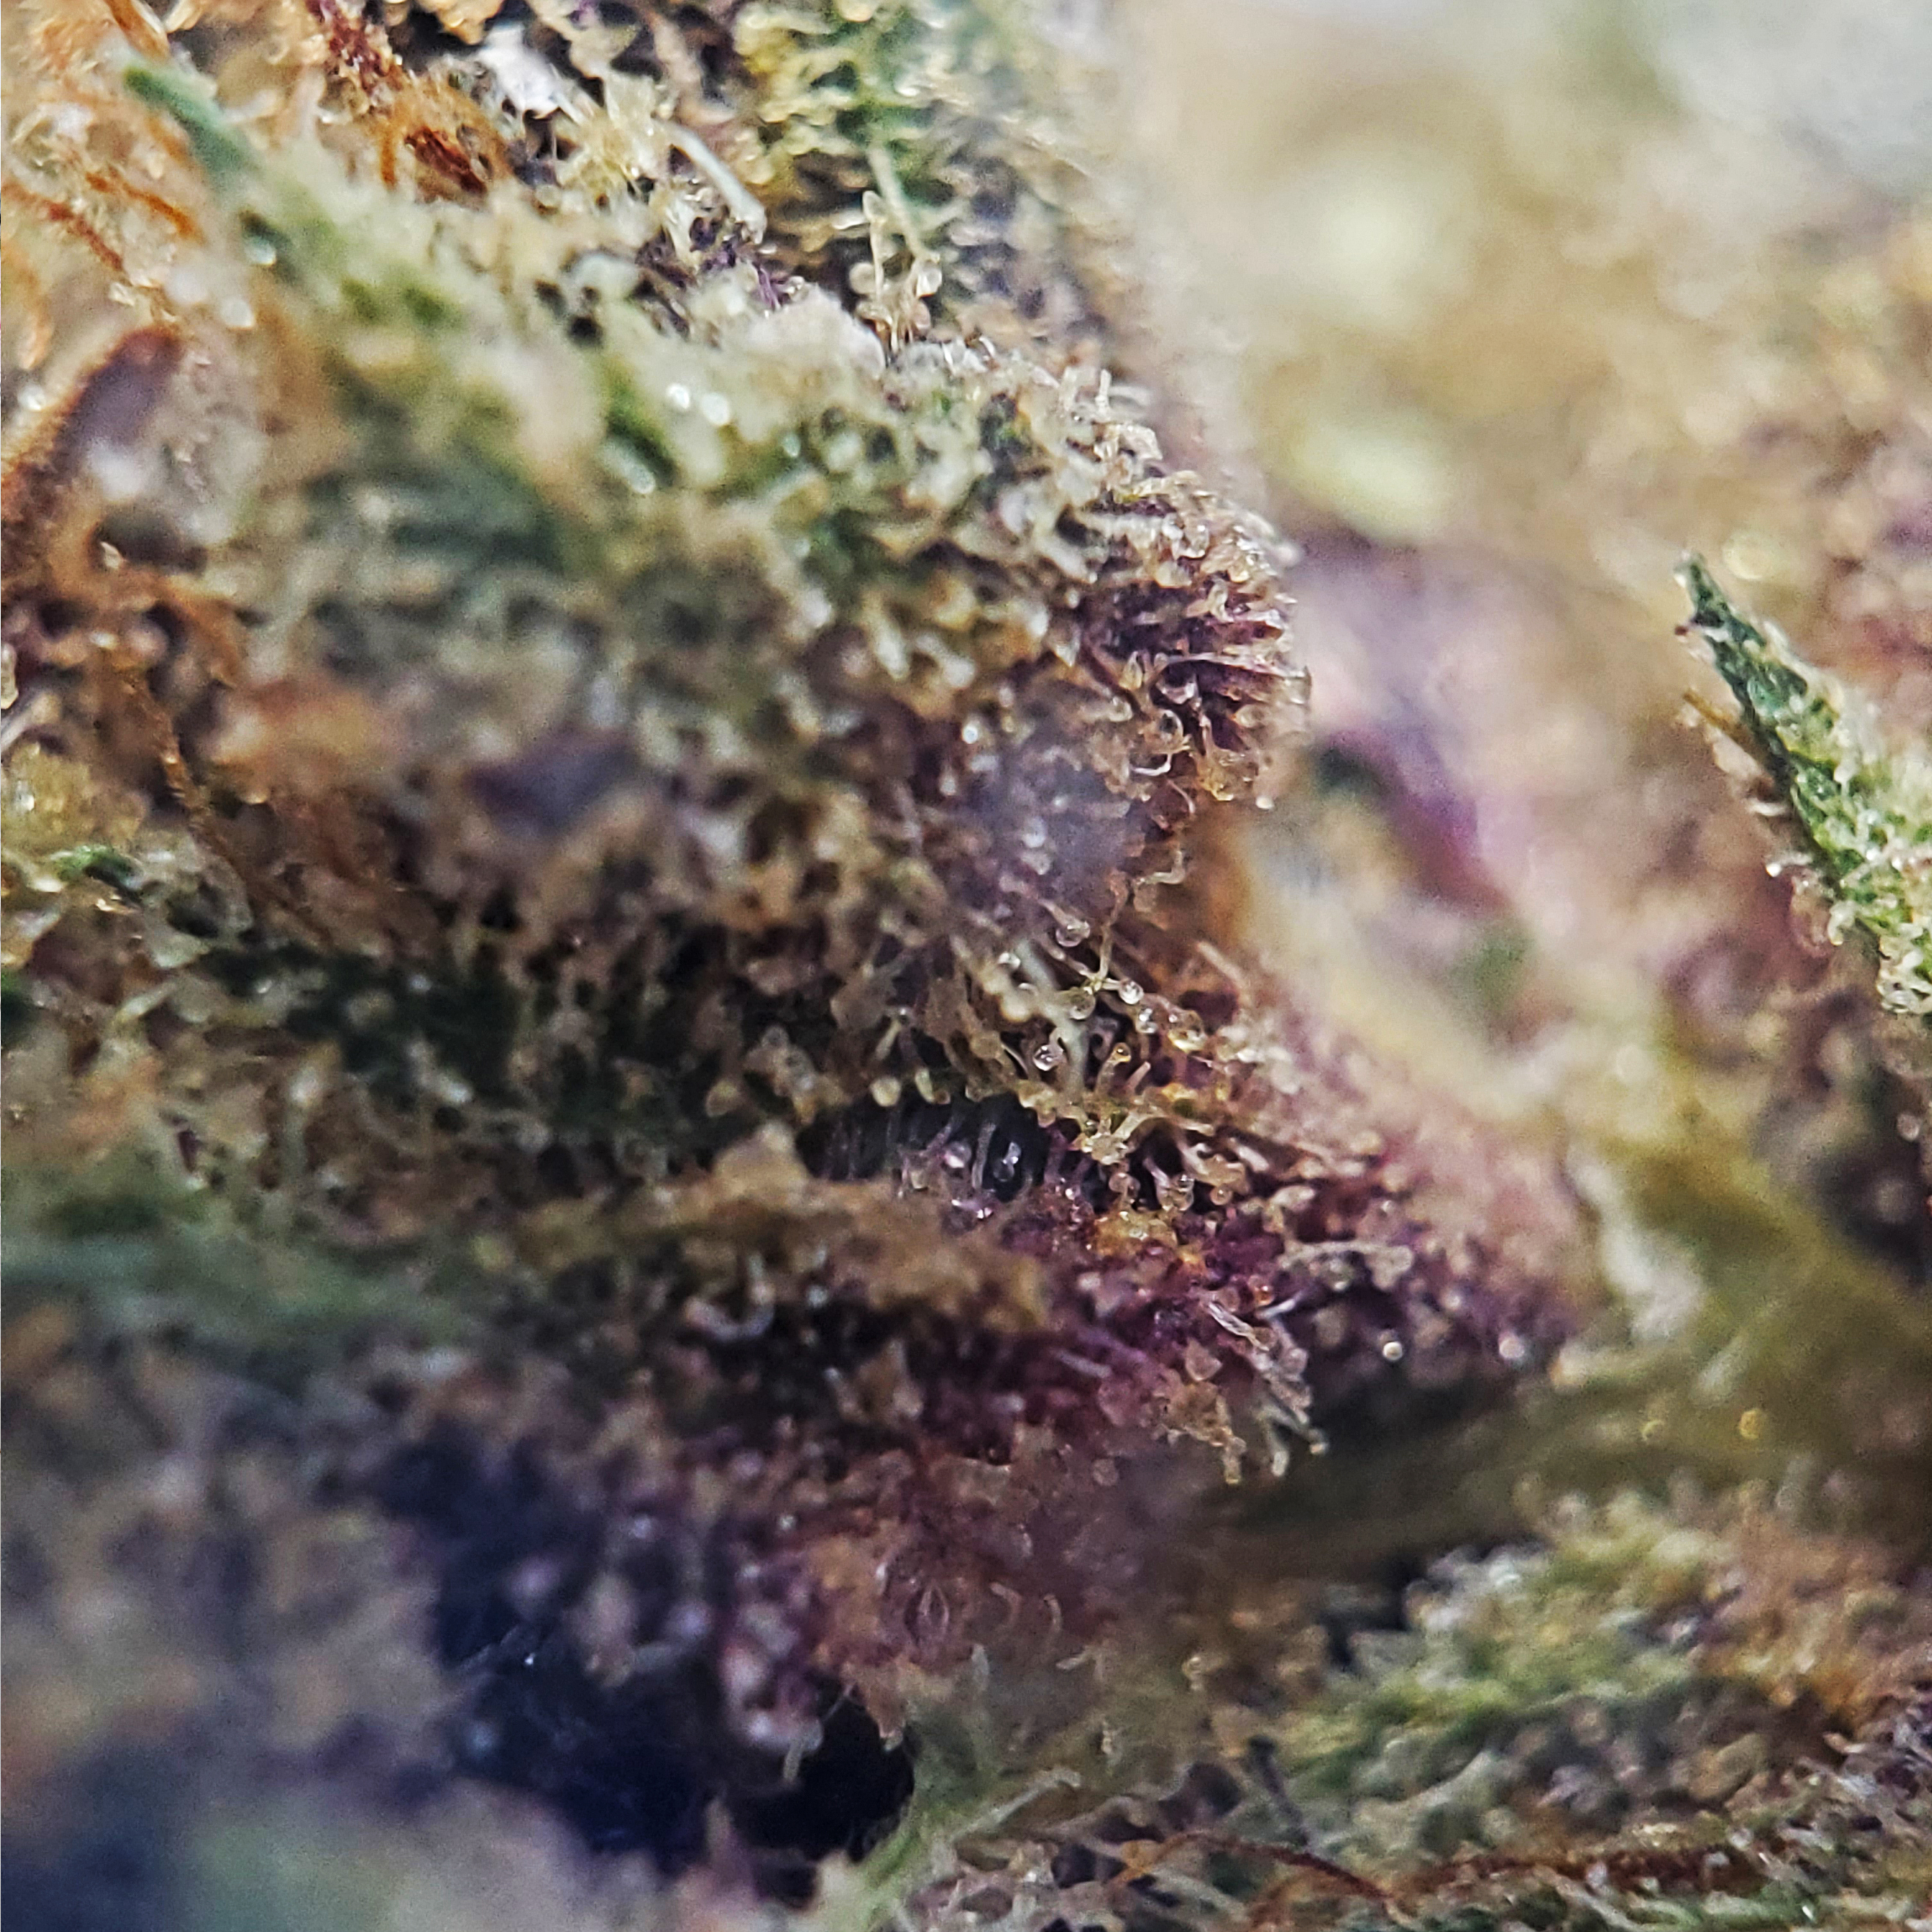 Woodstock Canadian Cannabis Licensed Producer Purple Chitral Indica Weed Strain Review - Stashmagazine.ca - Volume 1